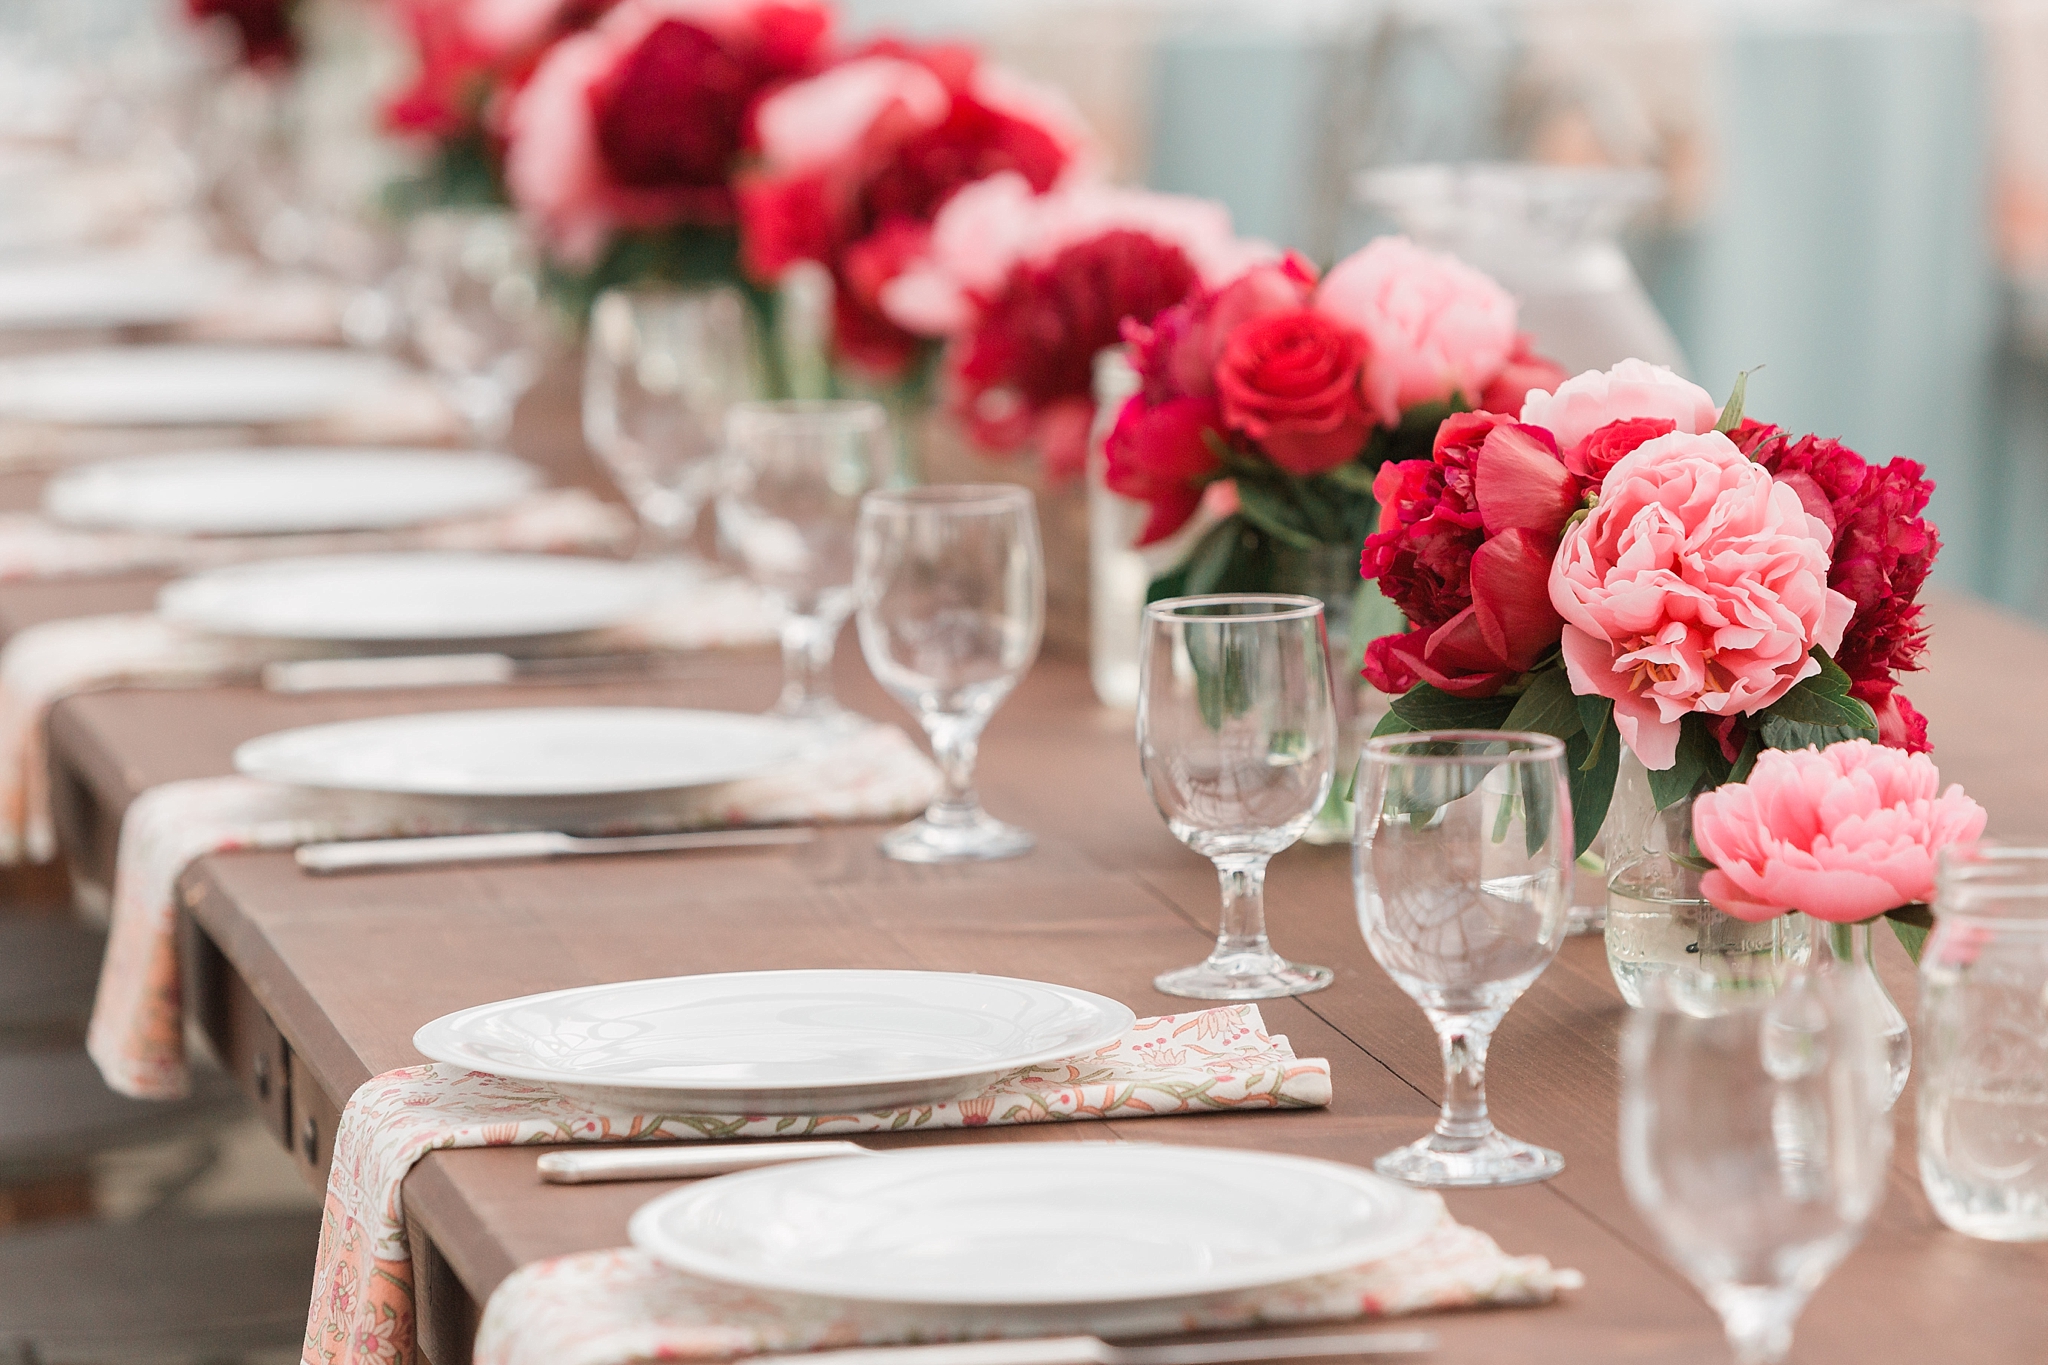 This Market at Grelen wedding was photographed by Washington, DC wedding photographer, Alicia Lacey.